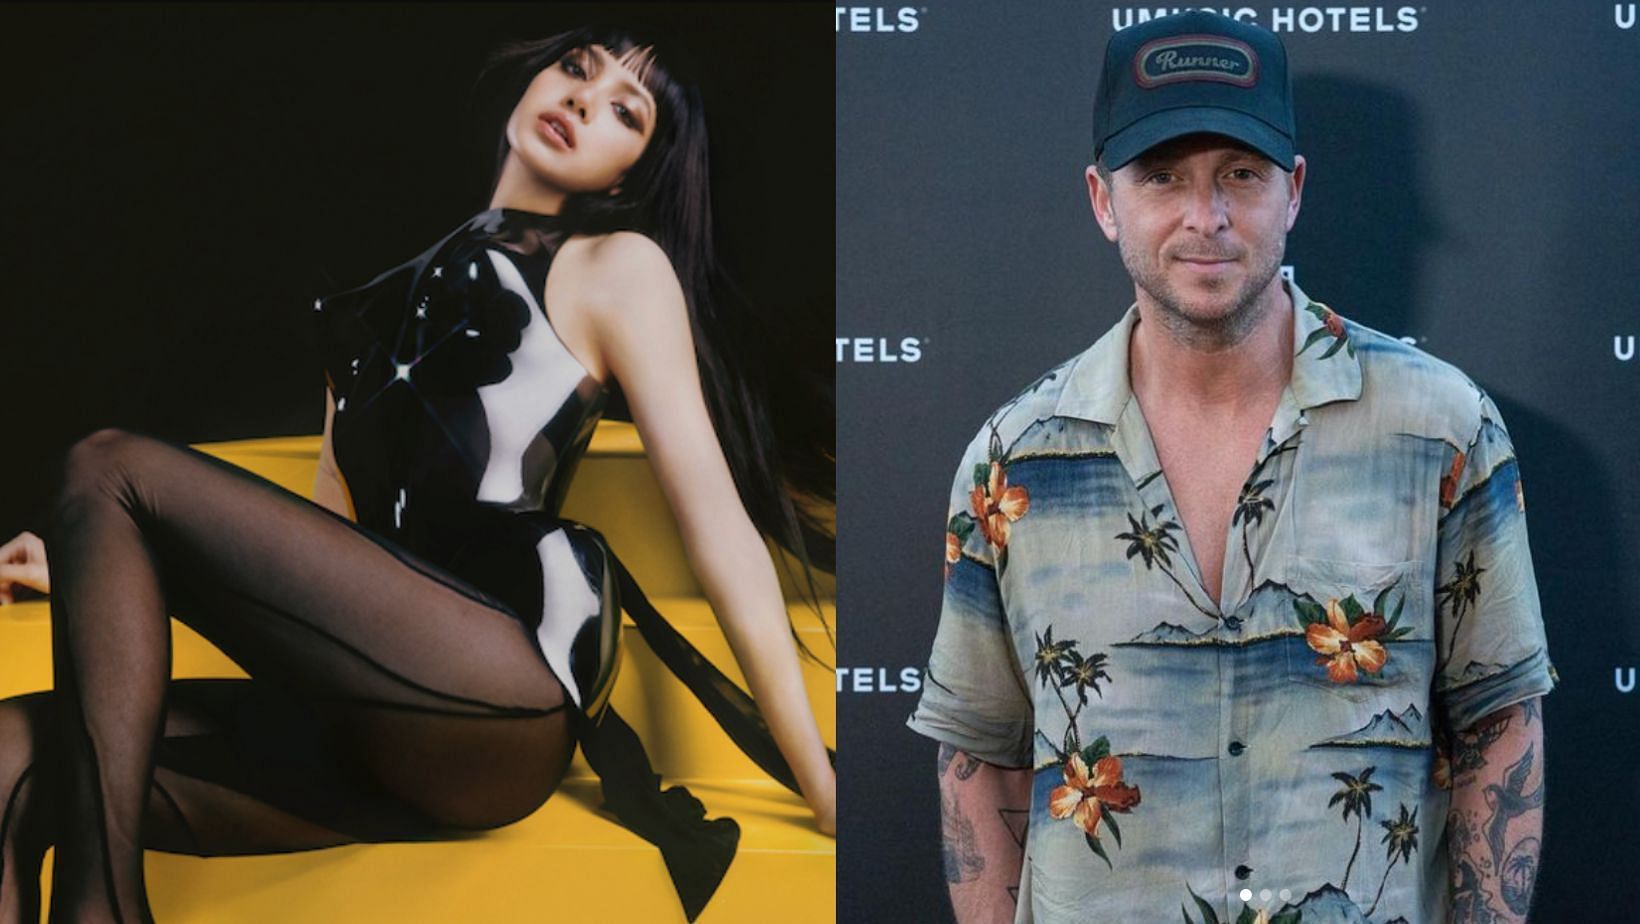 Ryan Tedder hints at an upcoming project with BLACKPINK&rsquo;s Lisa. (Images via Instagram/@ryantedder and RCA Records website)